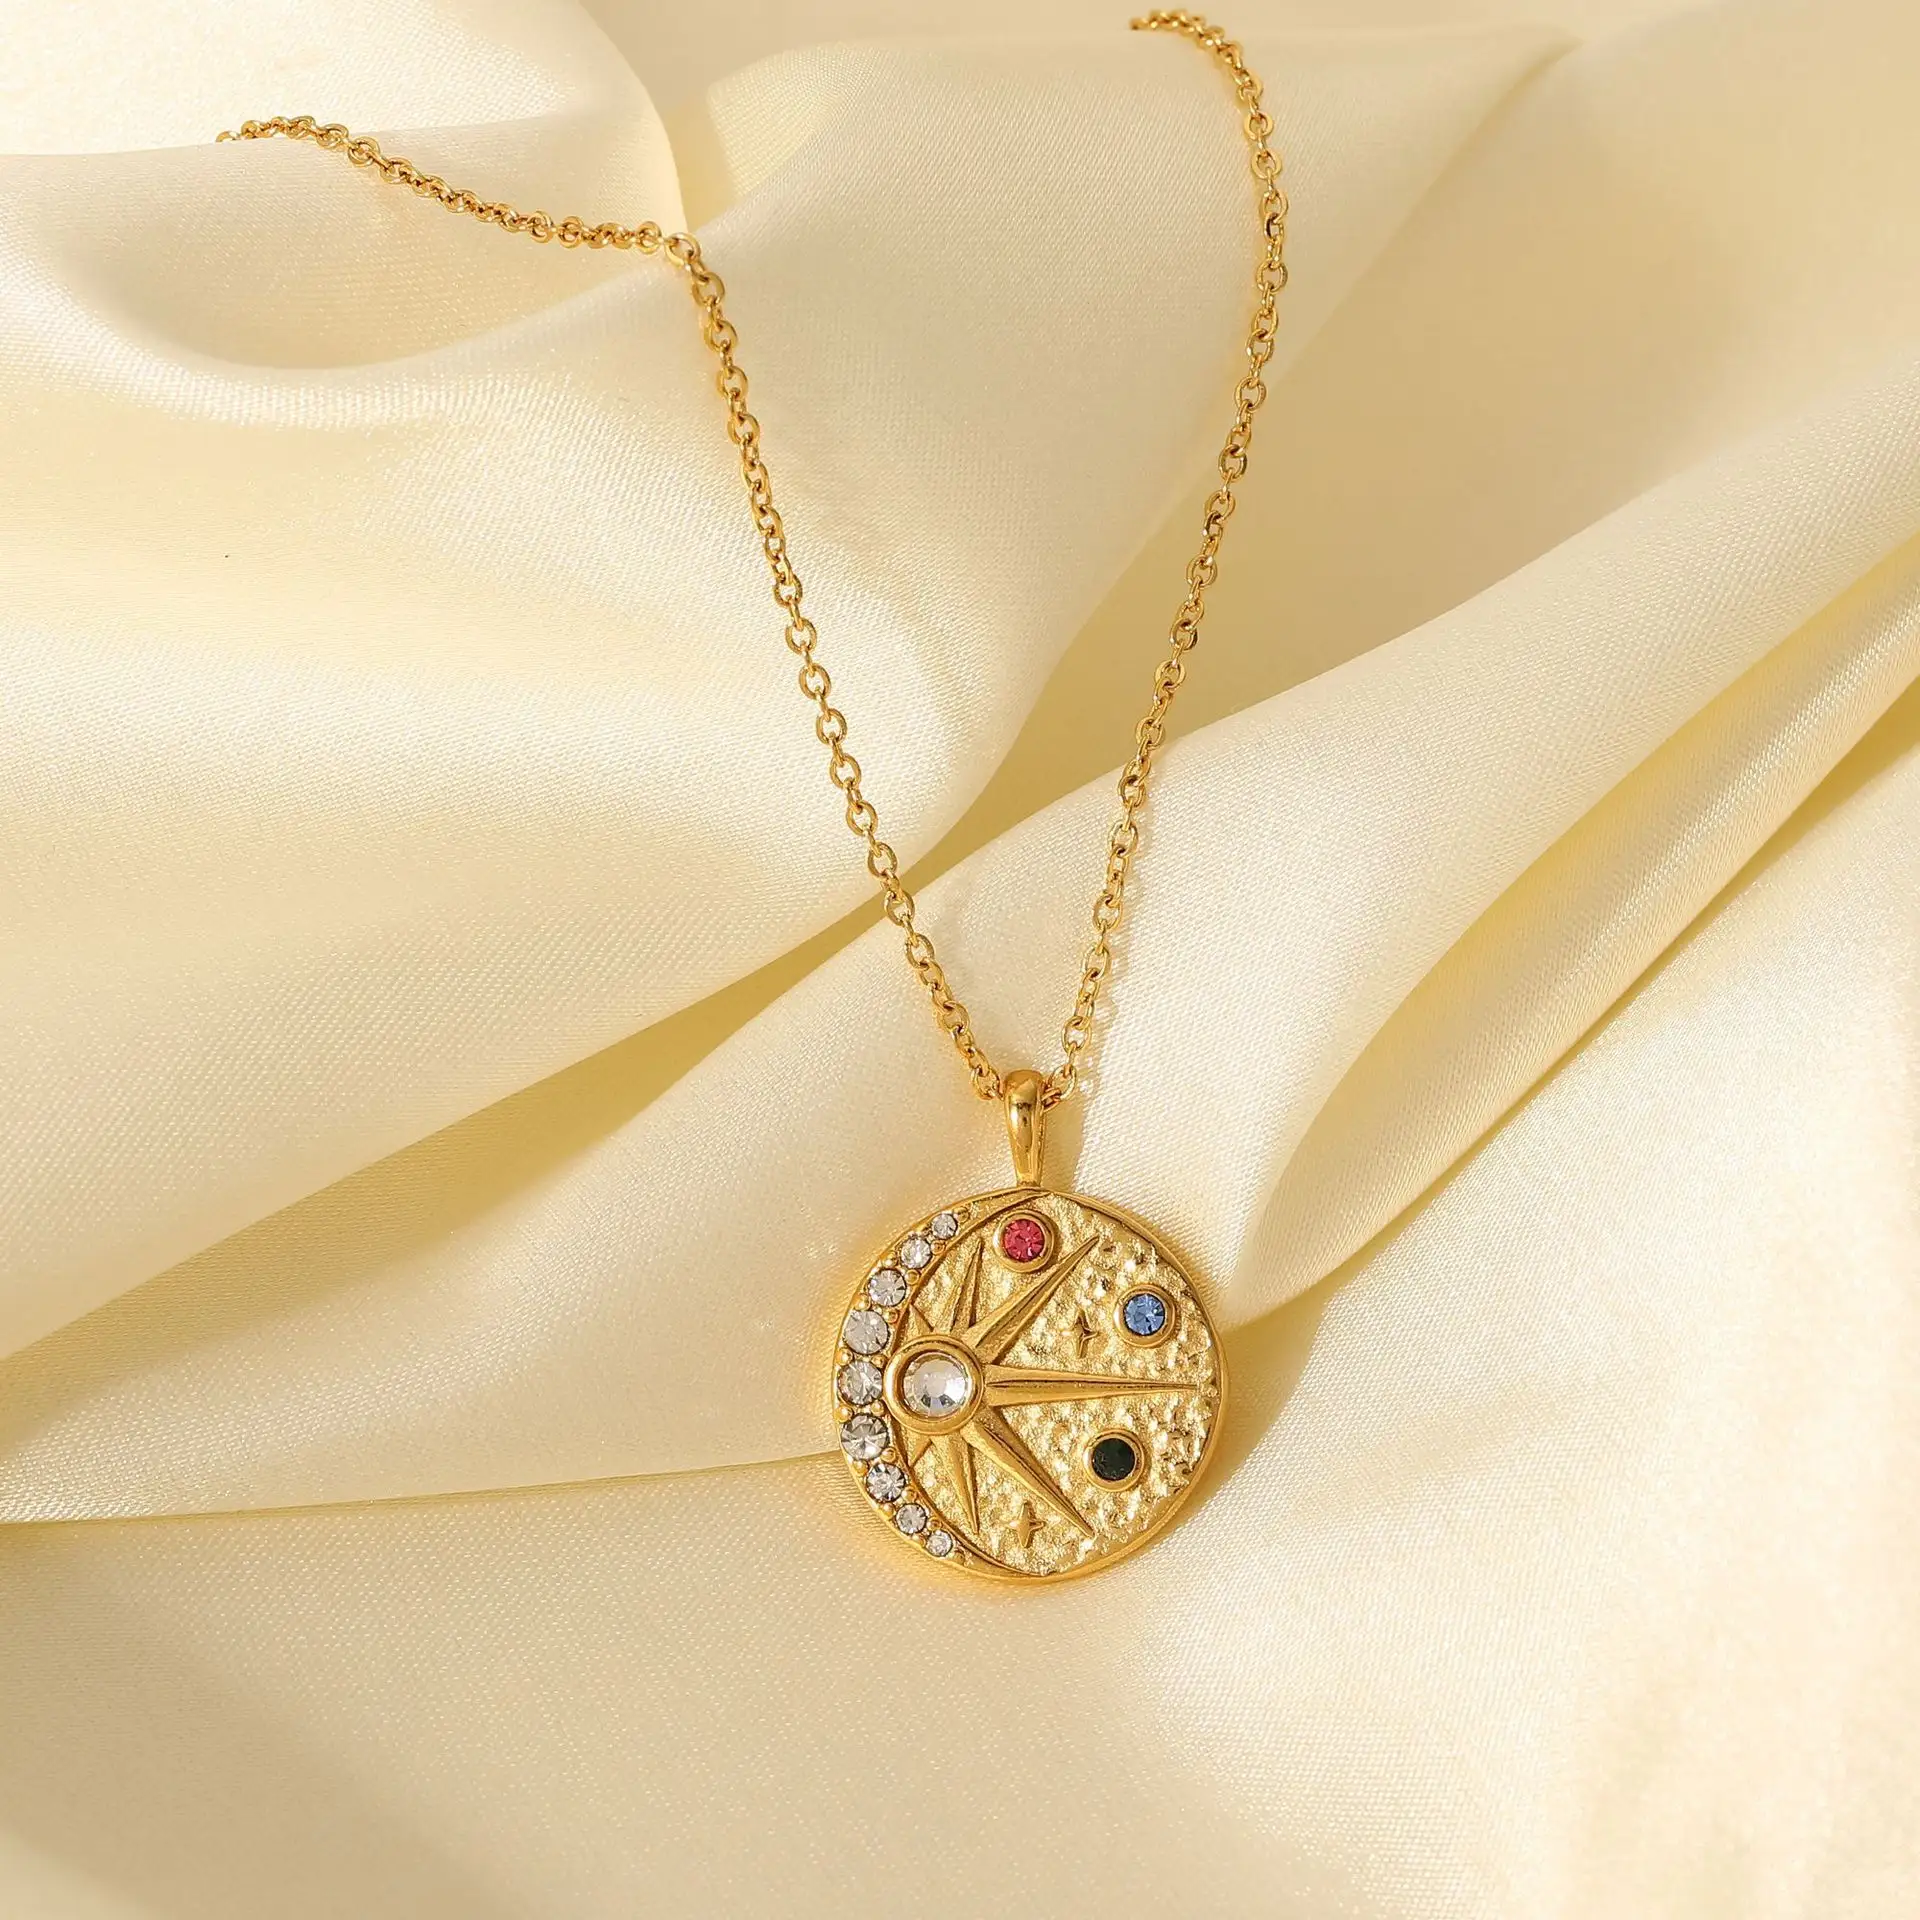 Vintage Sun Moon Embossed Hammer Pattern Color Zirconium Pendant 18K Gold Plated Stainless Steel Chain Necklace